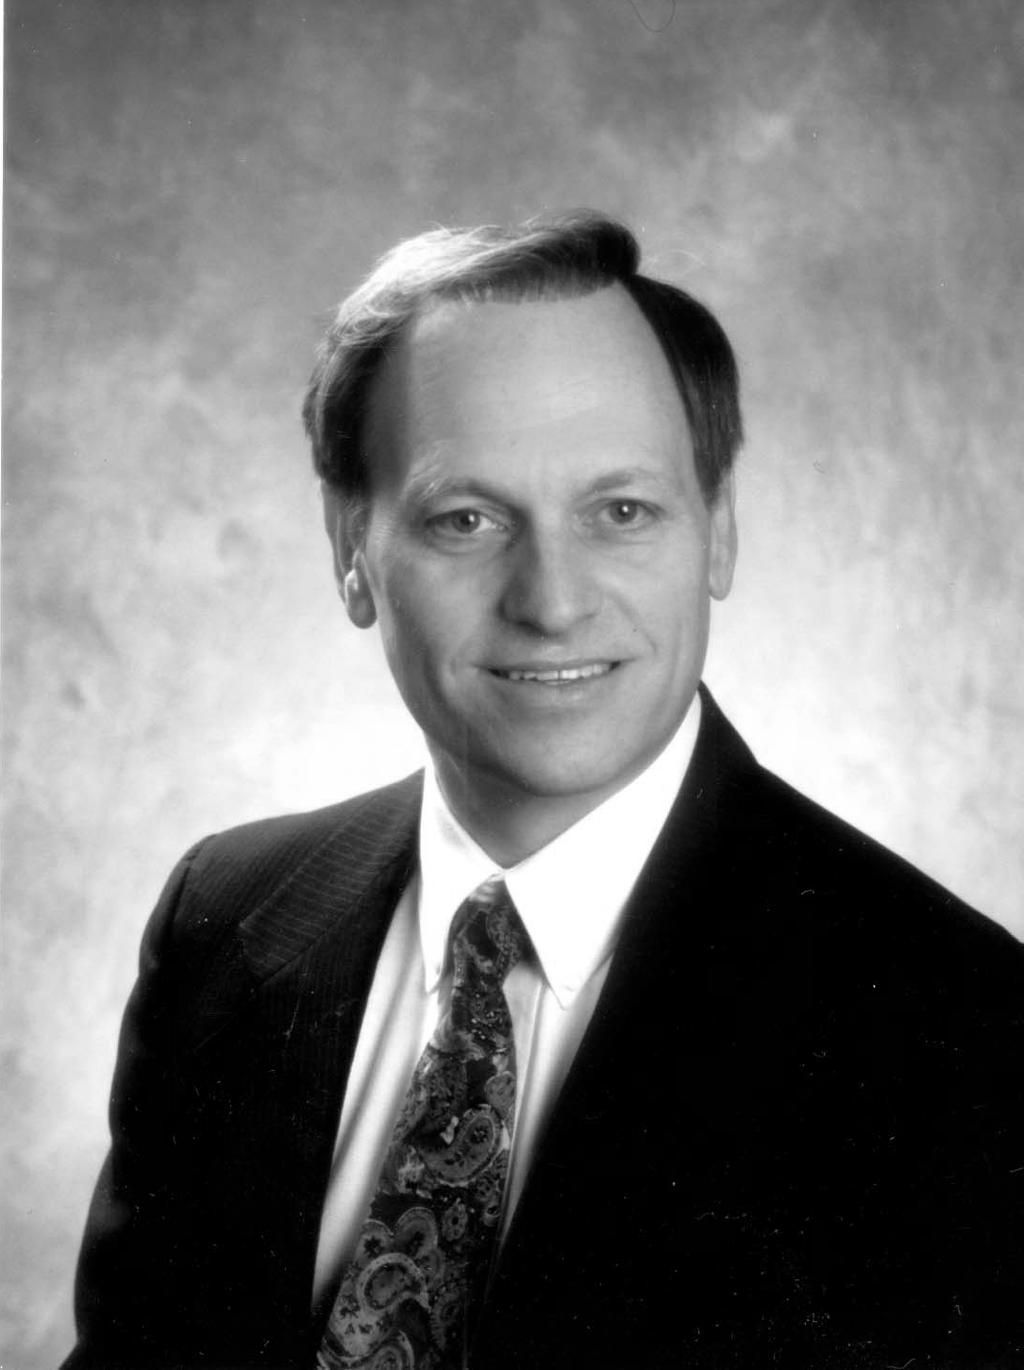 Vern A. Caron Vern Caron is president of Caron Engineering, a consulting firm engaged in hardware, software and systems design for passenger car and commercial vehicle applications.